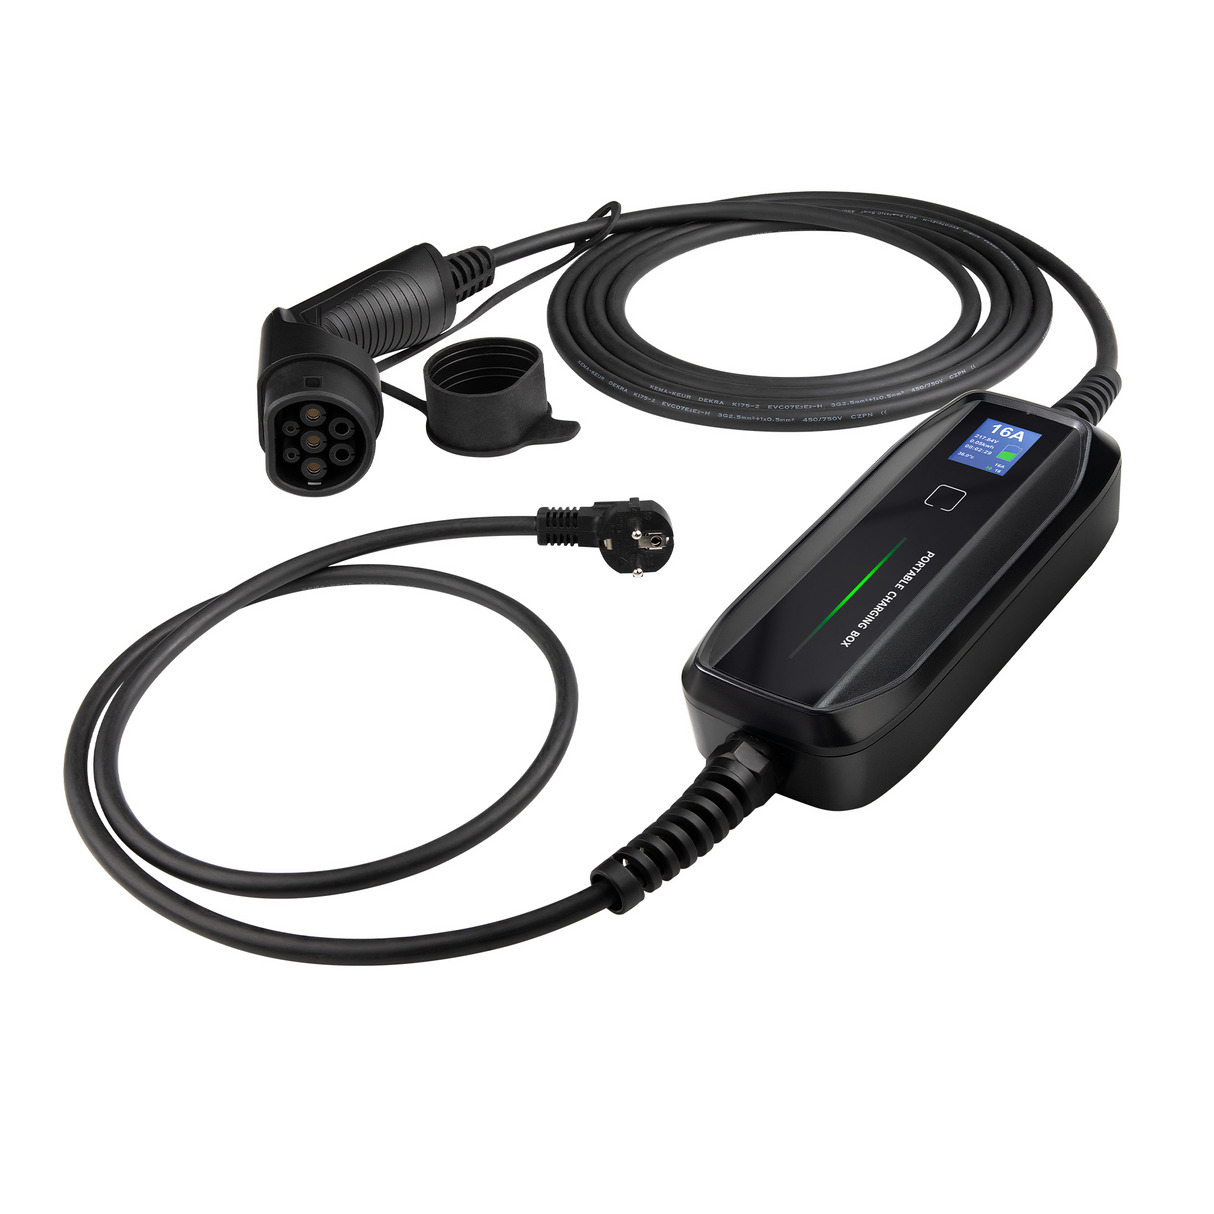 Mobile Charger Skoda CITIGOe iV - Besen with LCD - Type 2 to Schuko